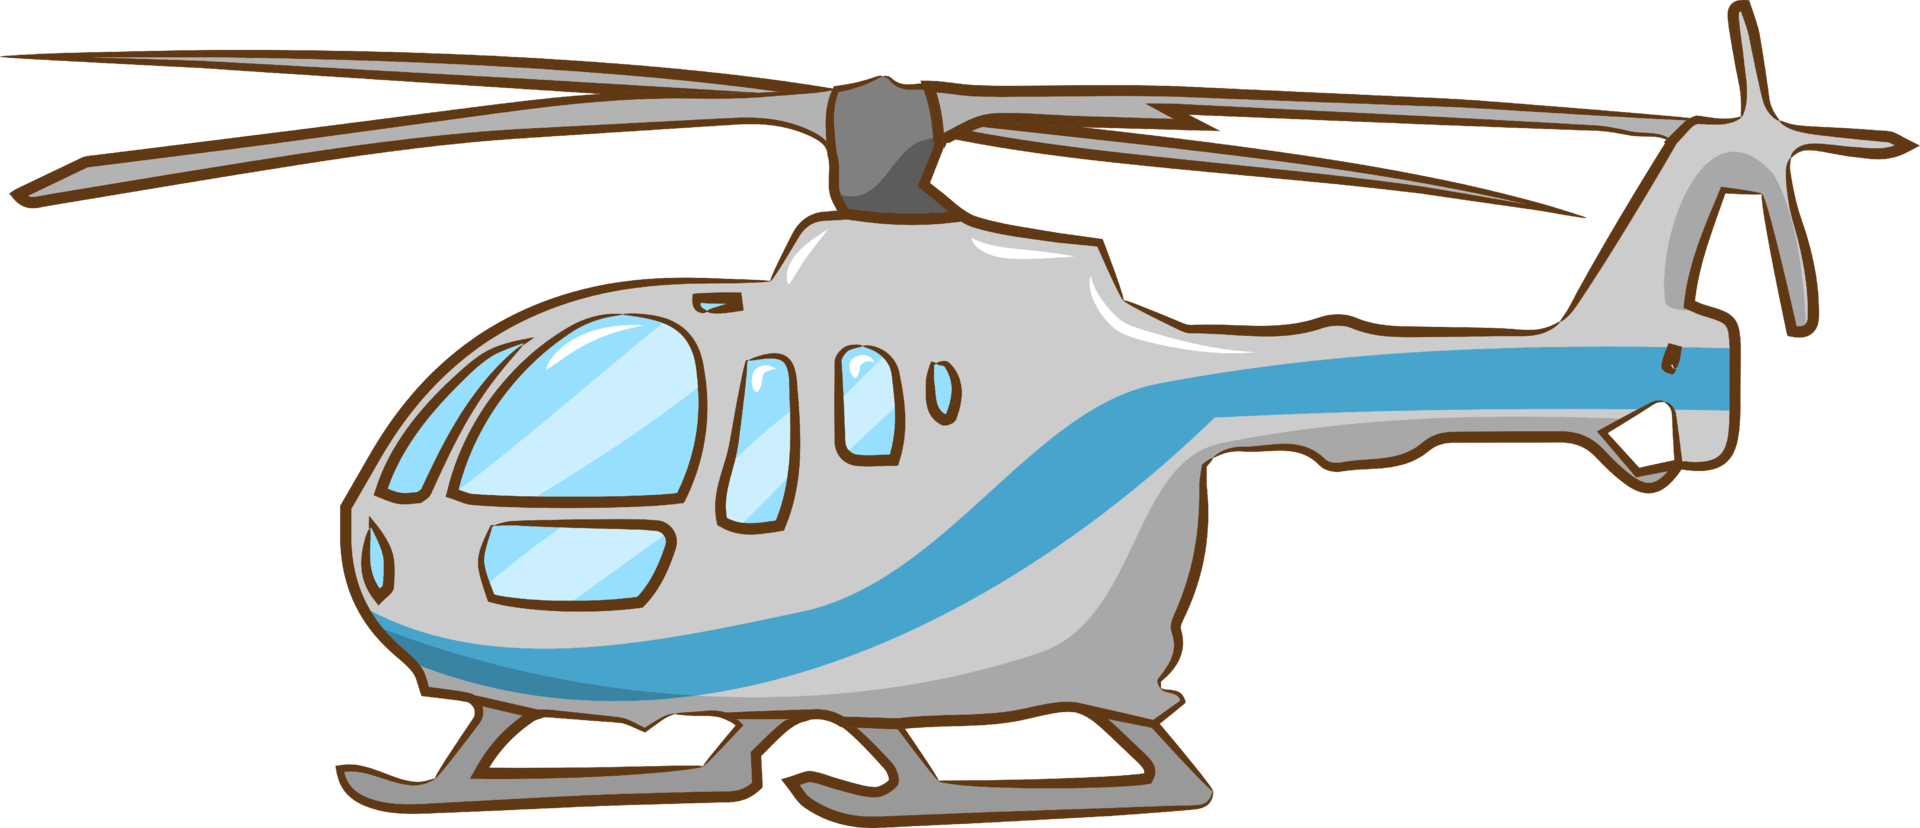 Helicopter png graphic clipart design